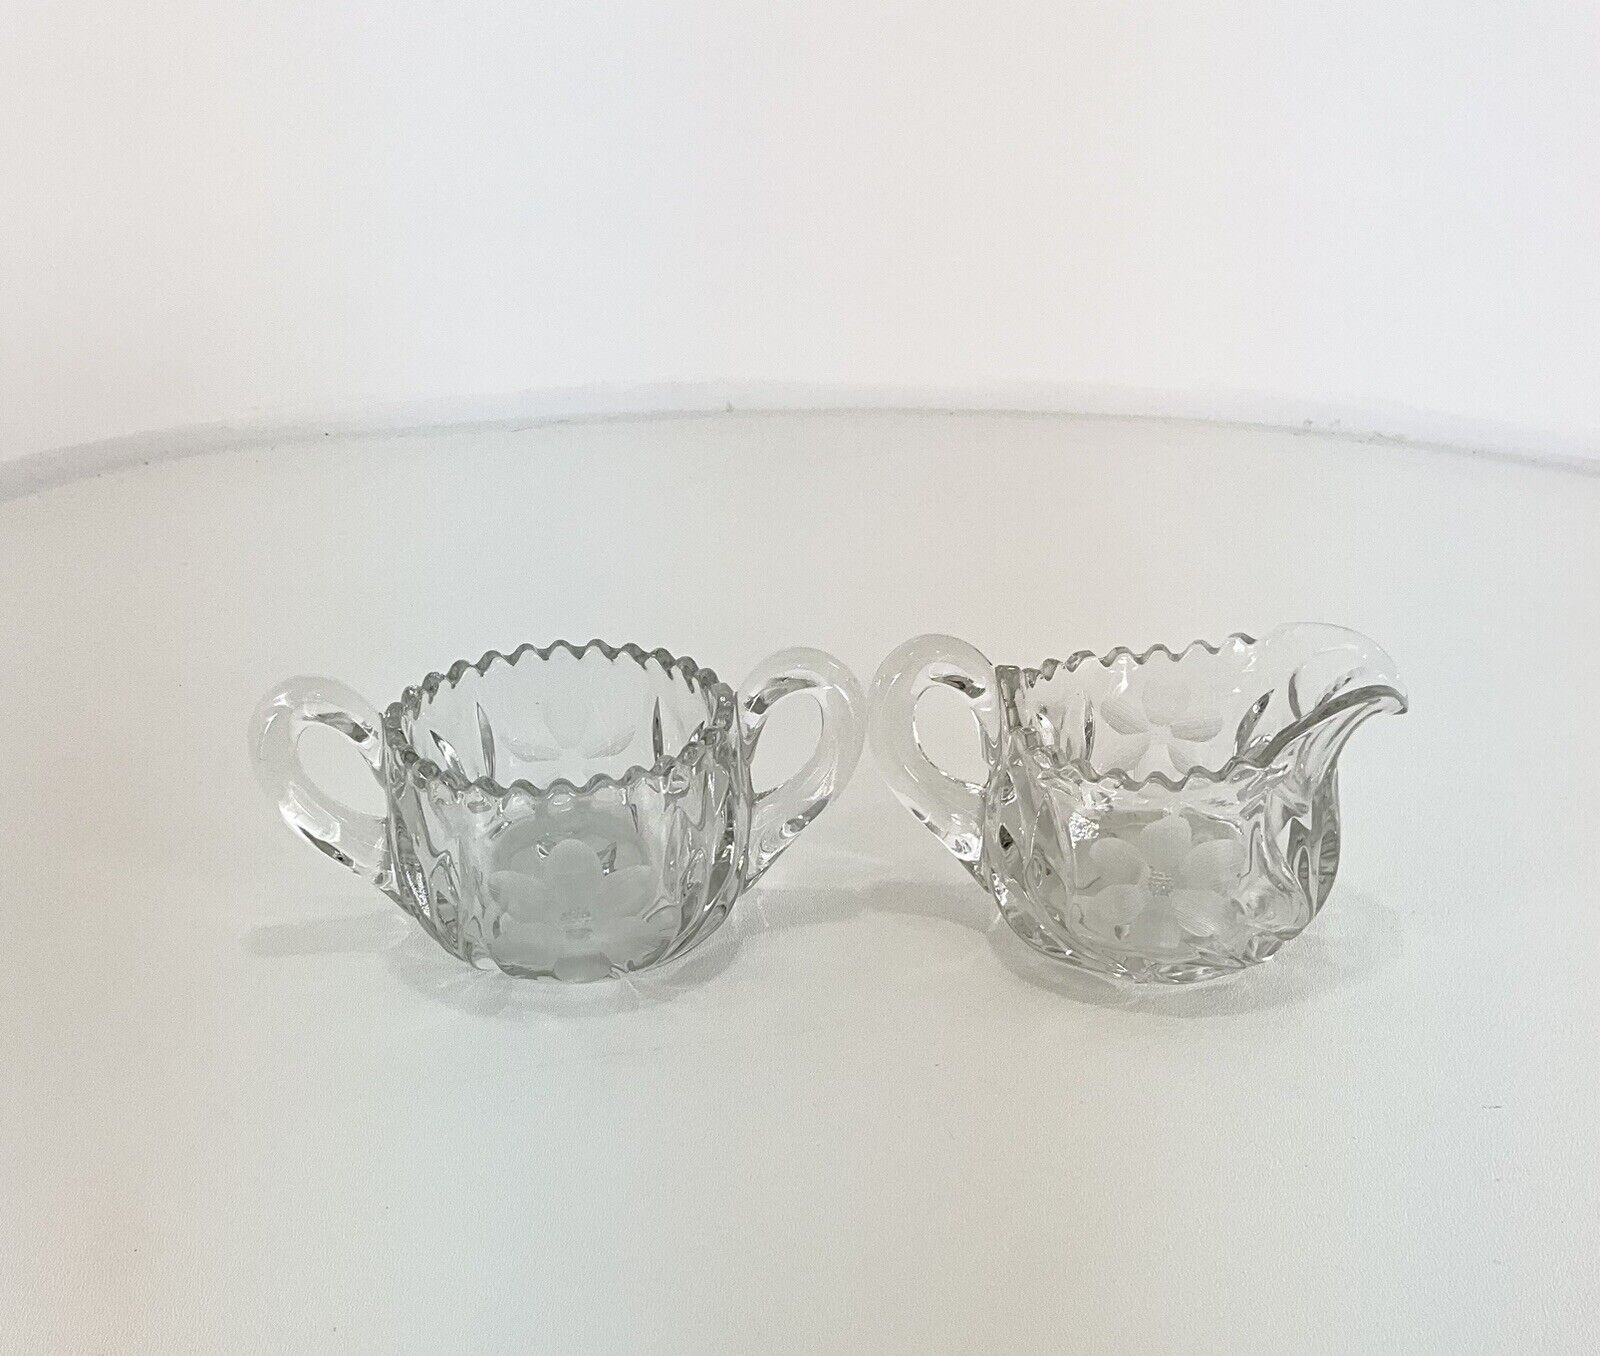 Vintage Crystal Creamer And Sugar Bowl With Beautiful Etched Flowers. Beautiful